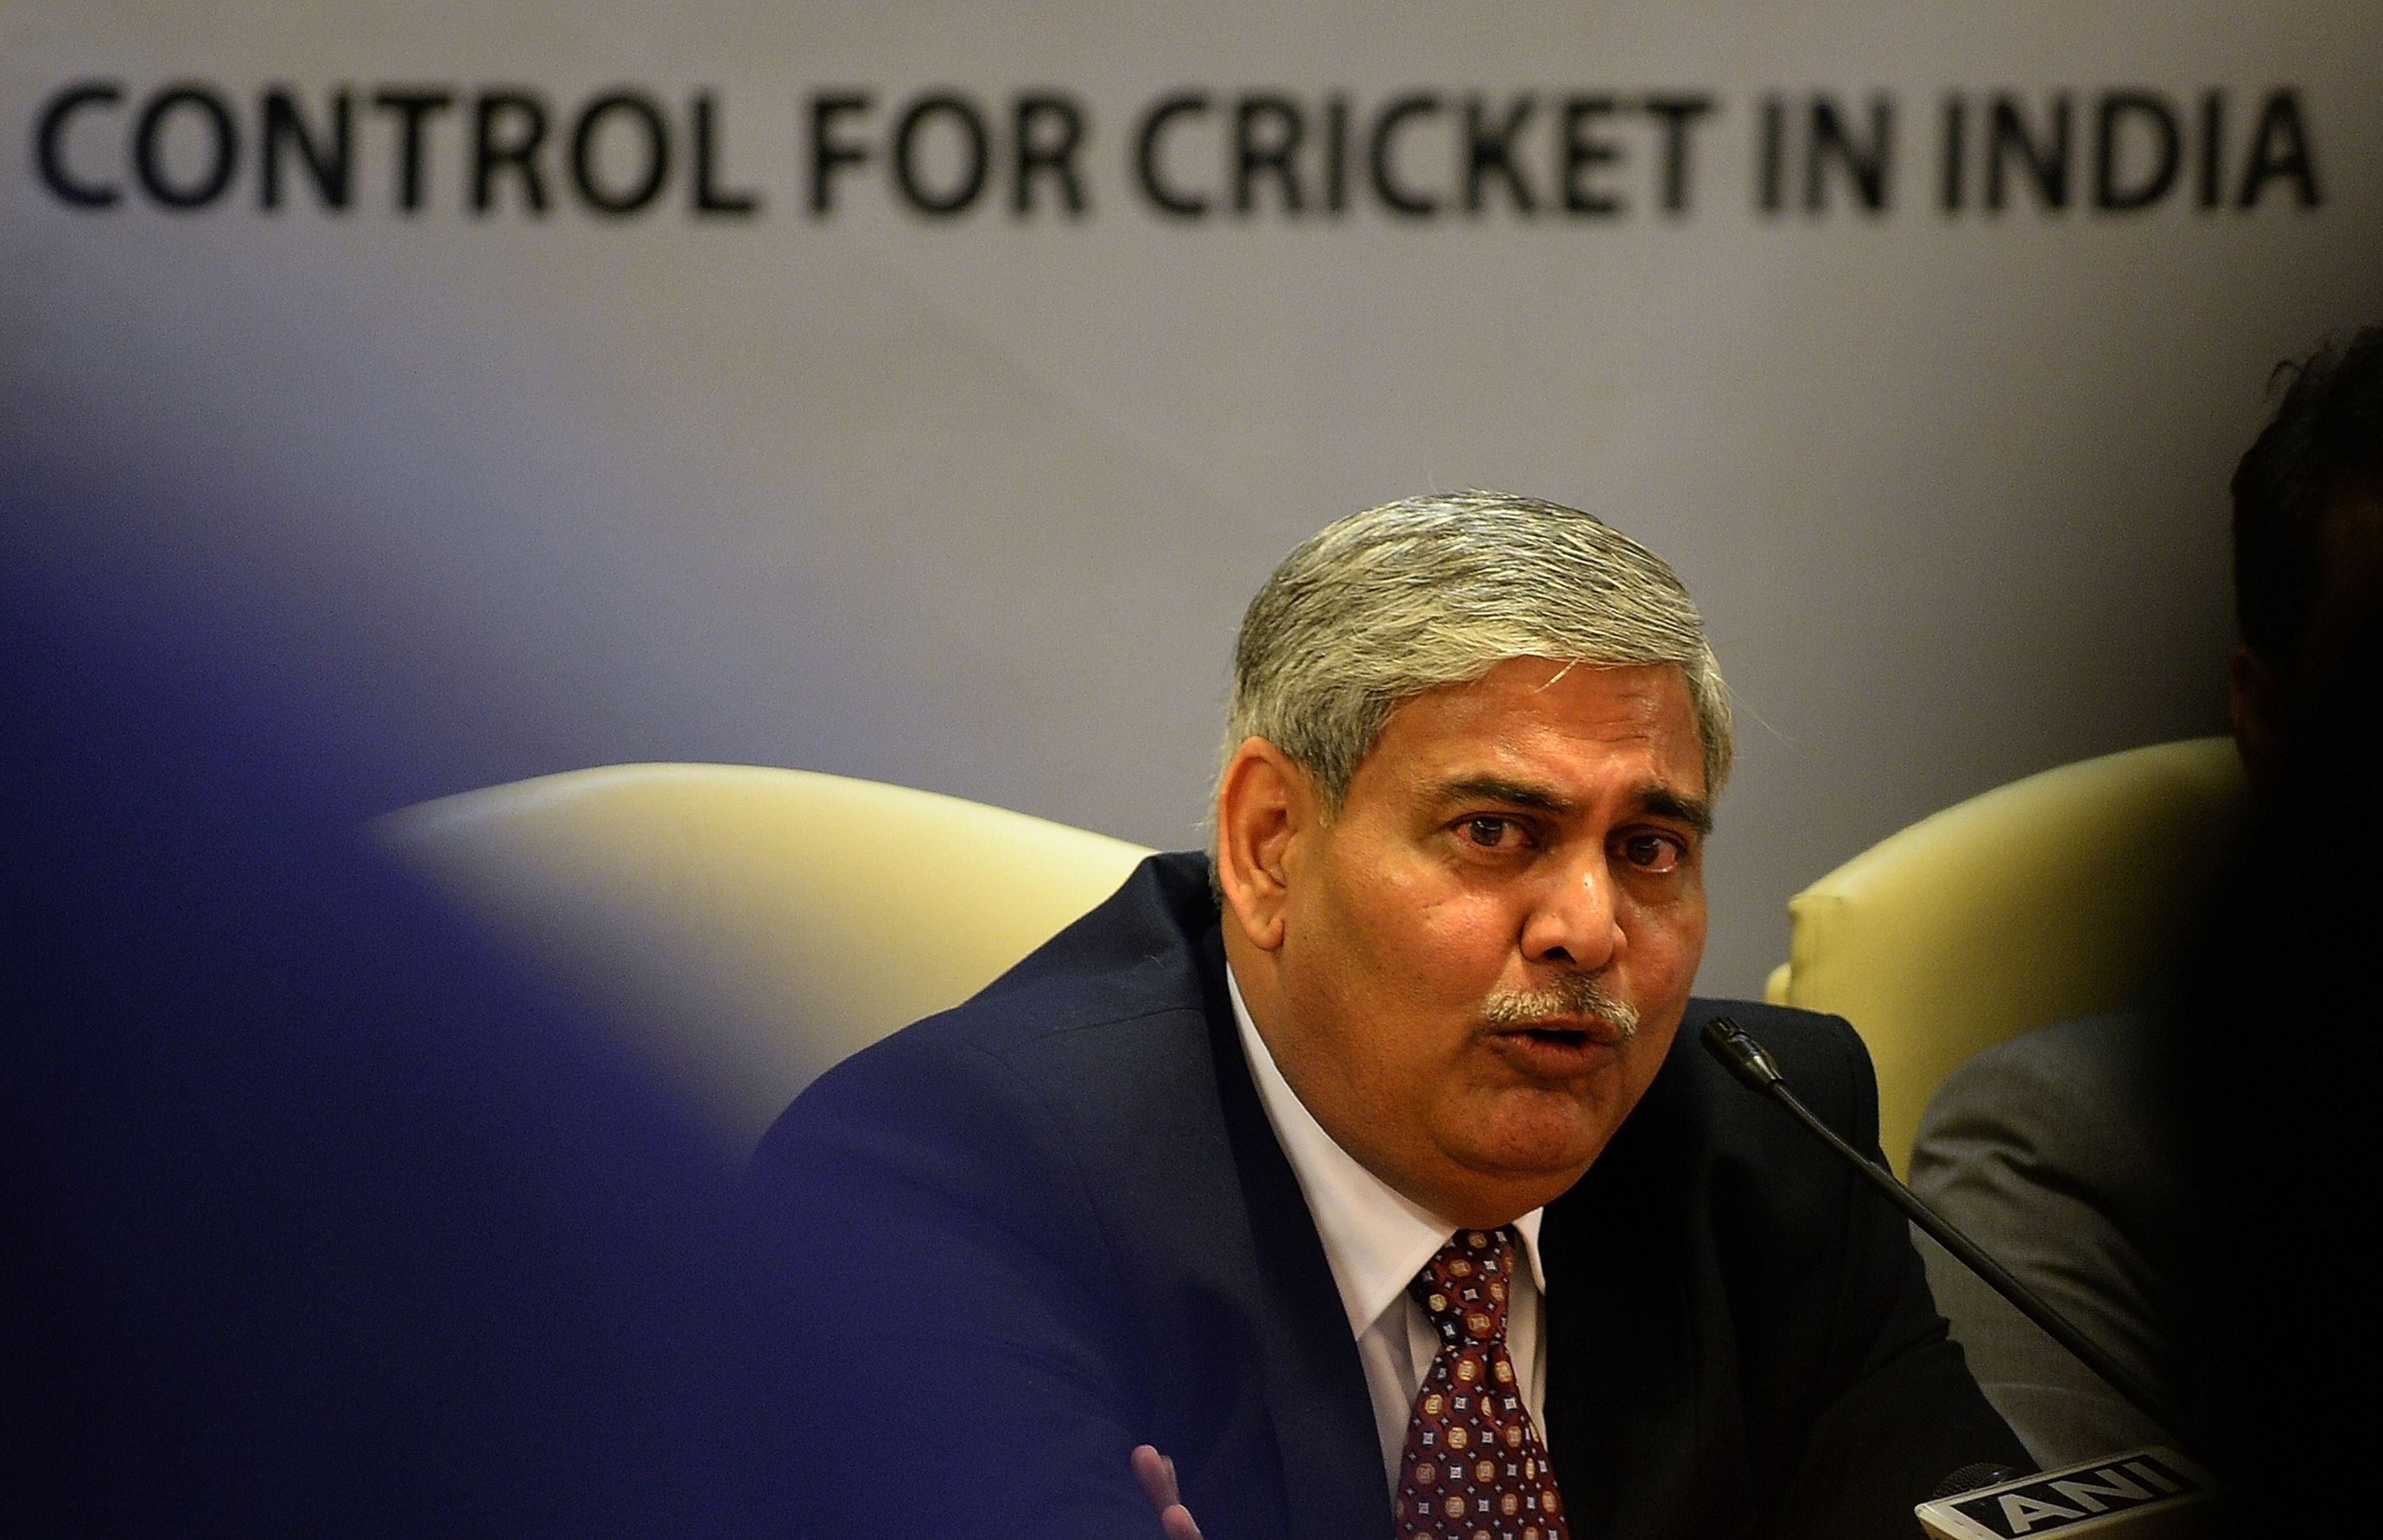 Board of Control for Cricket in India (BCCI) president Shashank Manohar speaks after taking charge at the Indian cricket board's headquarters at the Wankhede stadium in Mumbai on October 4, 2015. Manohar became the new BCCI chief at a special general meeting on October 4, after the last BCCI chief Jagmohan Dalmiya, 75, died in September.   AFP PHOTO / INDRANIL MUKHERJEE